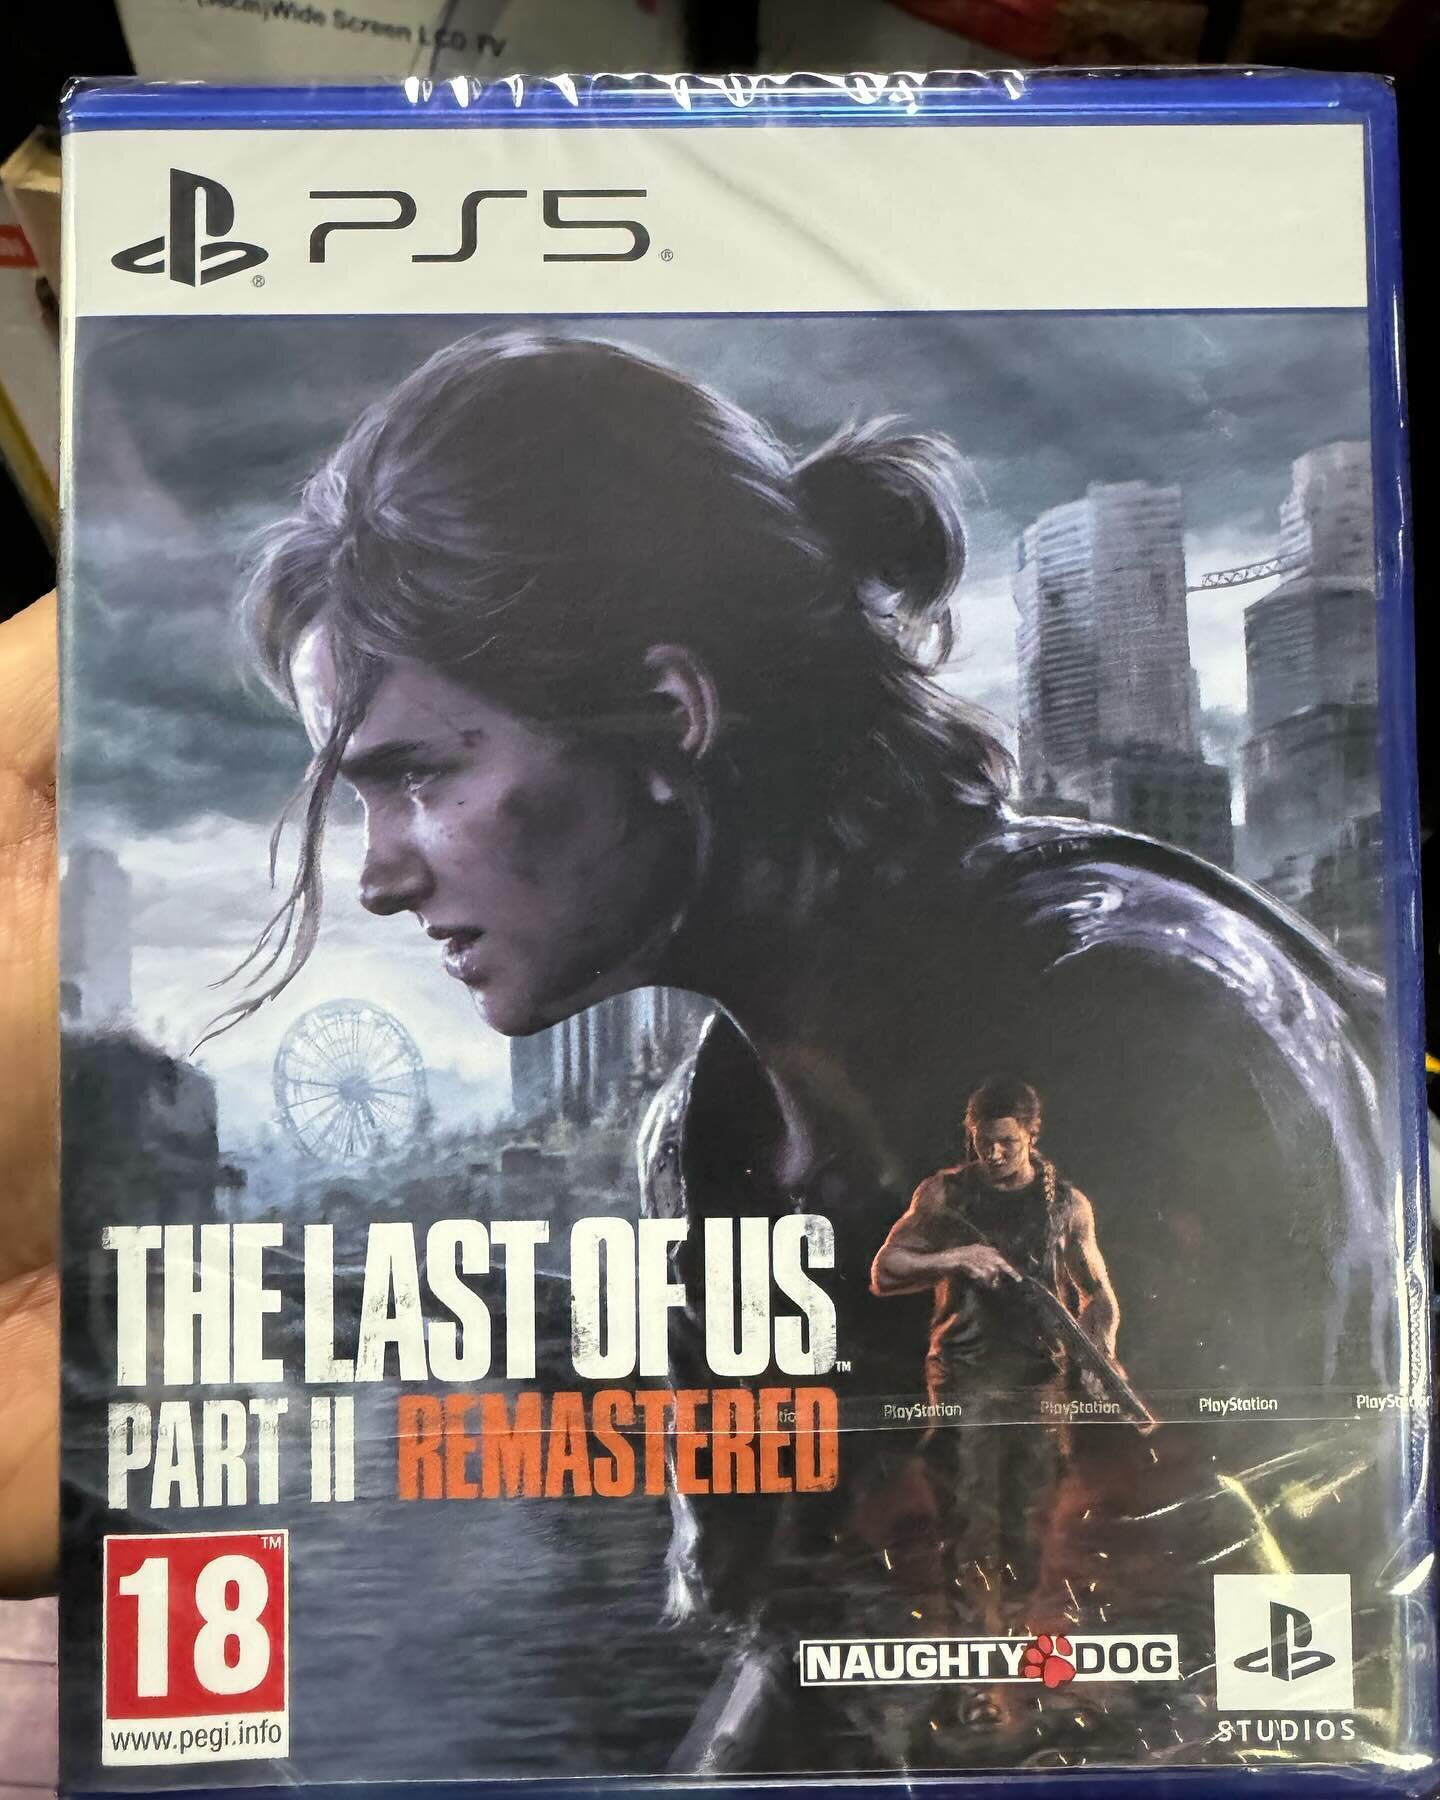 The Last Of Us Part II Remastered out now